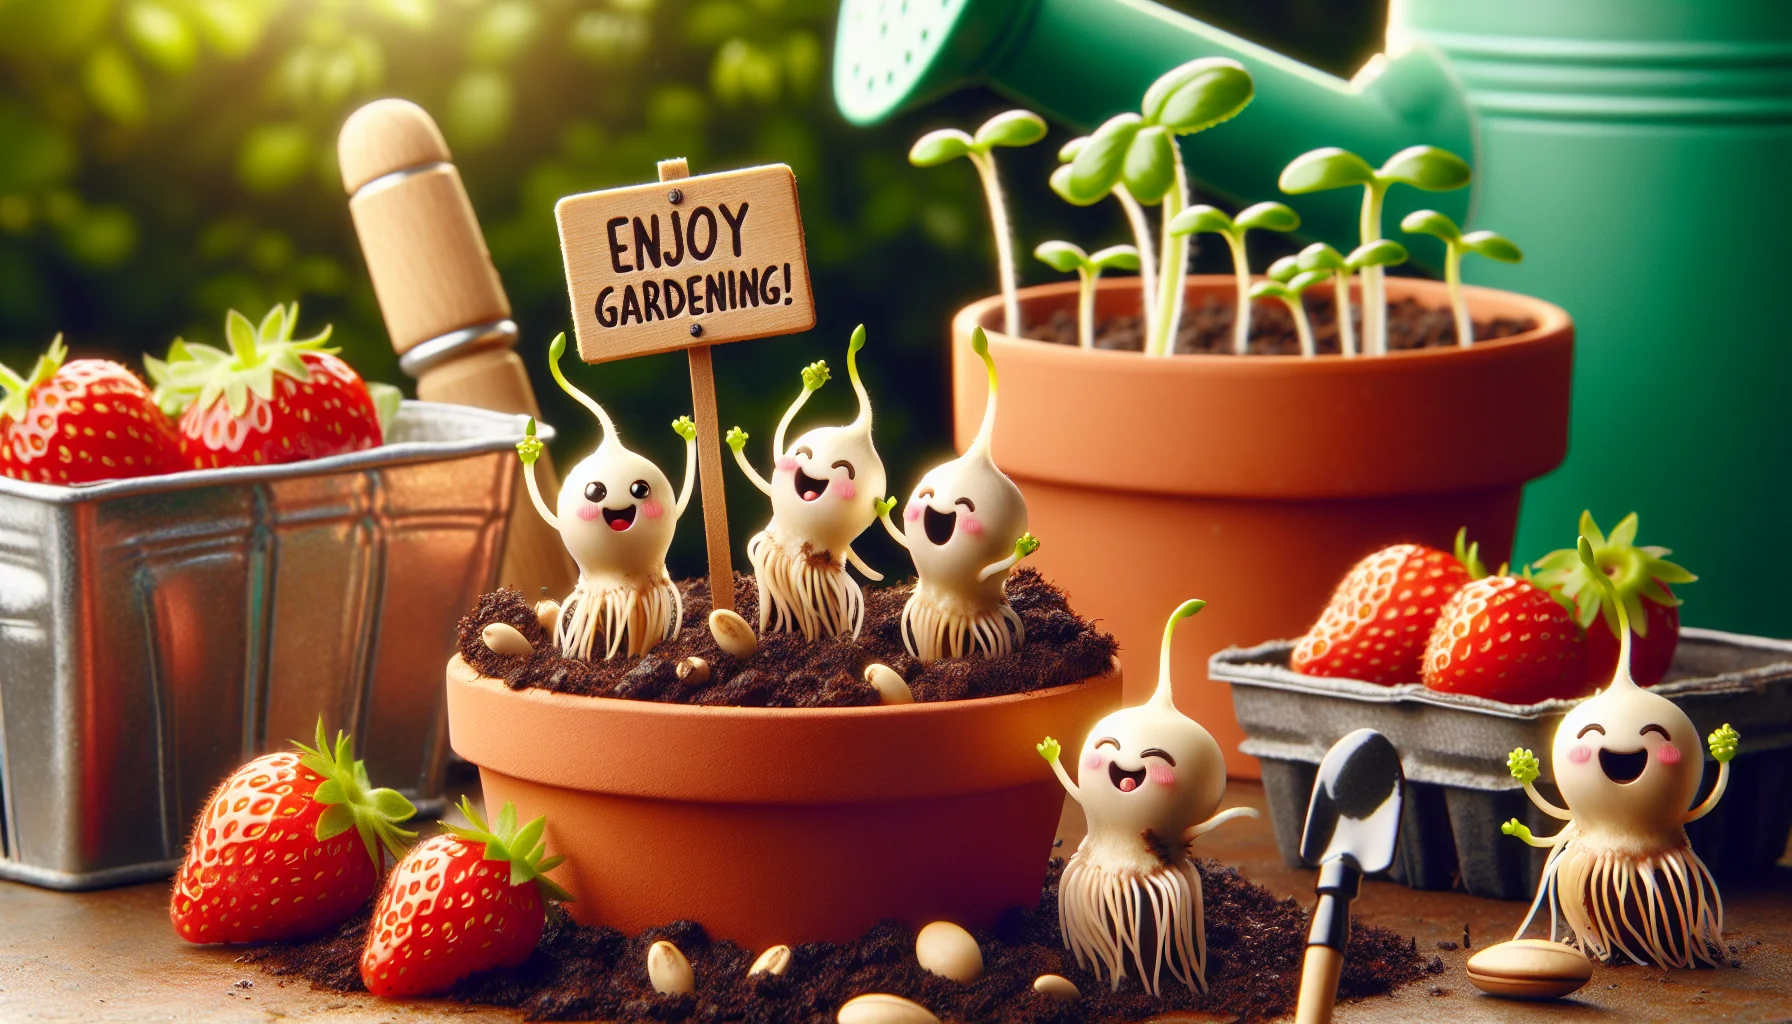 Imagine a whimsical scenario where small germinating strawberry seeds are putting on a garden show. They have little faces full of enthusiasm and tiny green sprouts as arms, waving cheerfully. They're perched on rich brown soil that glistens with life in a terracotta pot next to a small comical wooden sign that reads 'Enjoy gardening!'. The background has garden tools lying around playfully, a watering can is giving the performance spotlight as if it's the sun, and there's an audience of various flora enjoying the show, emitting a fulsome and enthusiastic vibe enticing people to join the joy of gardening.